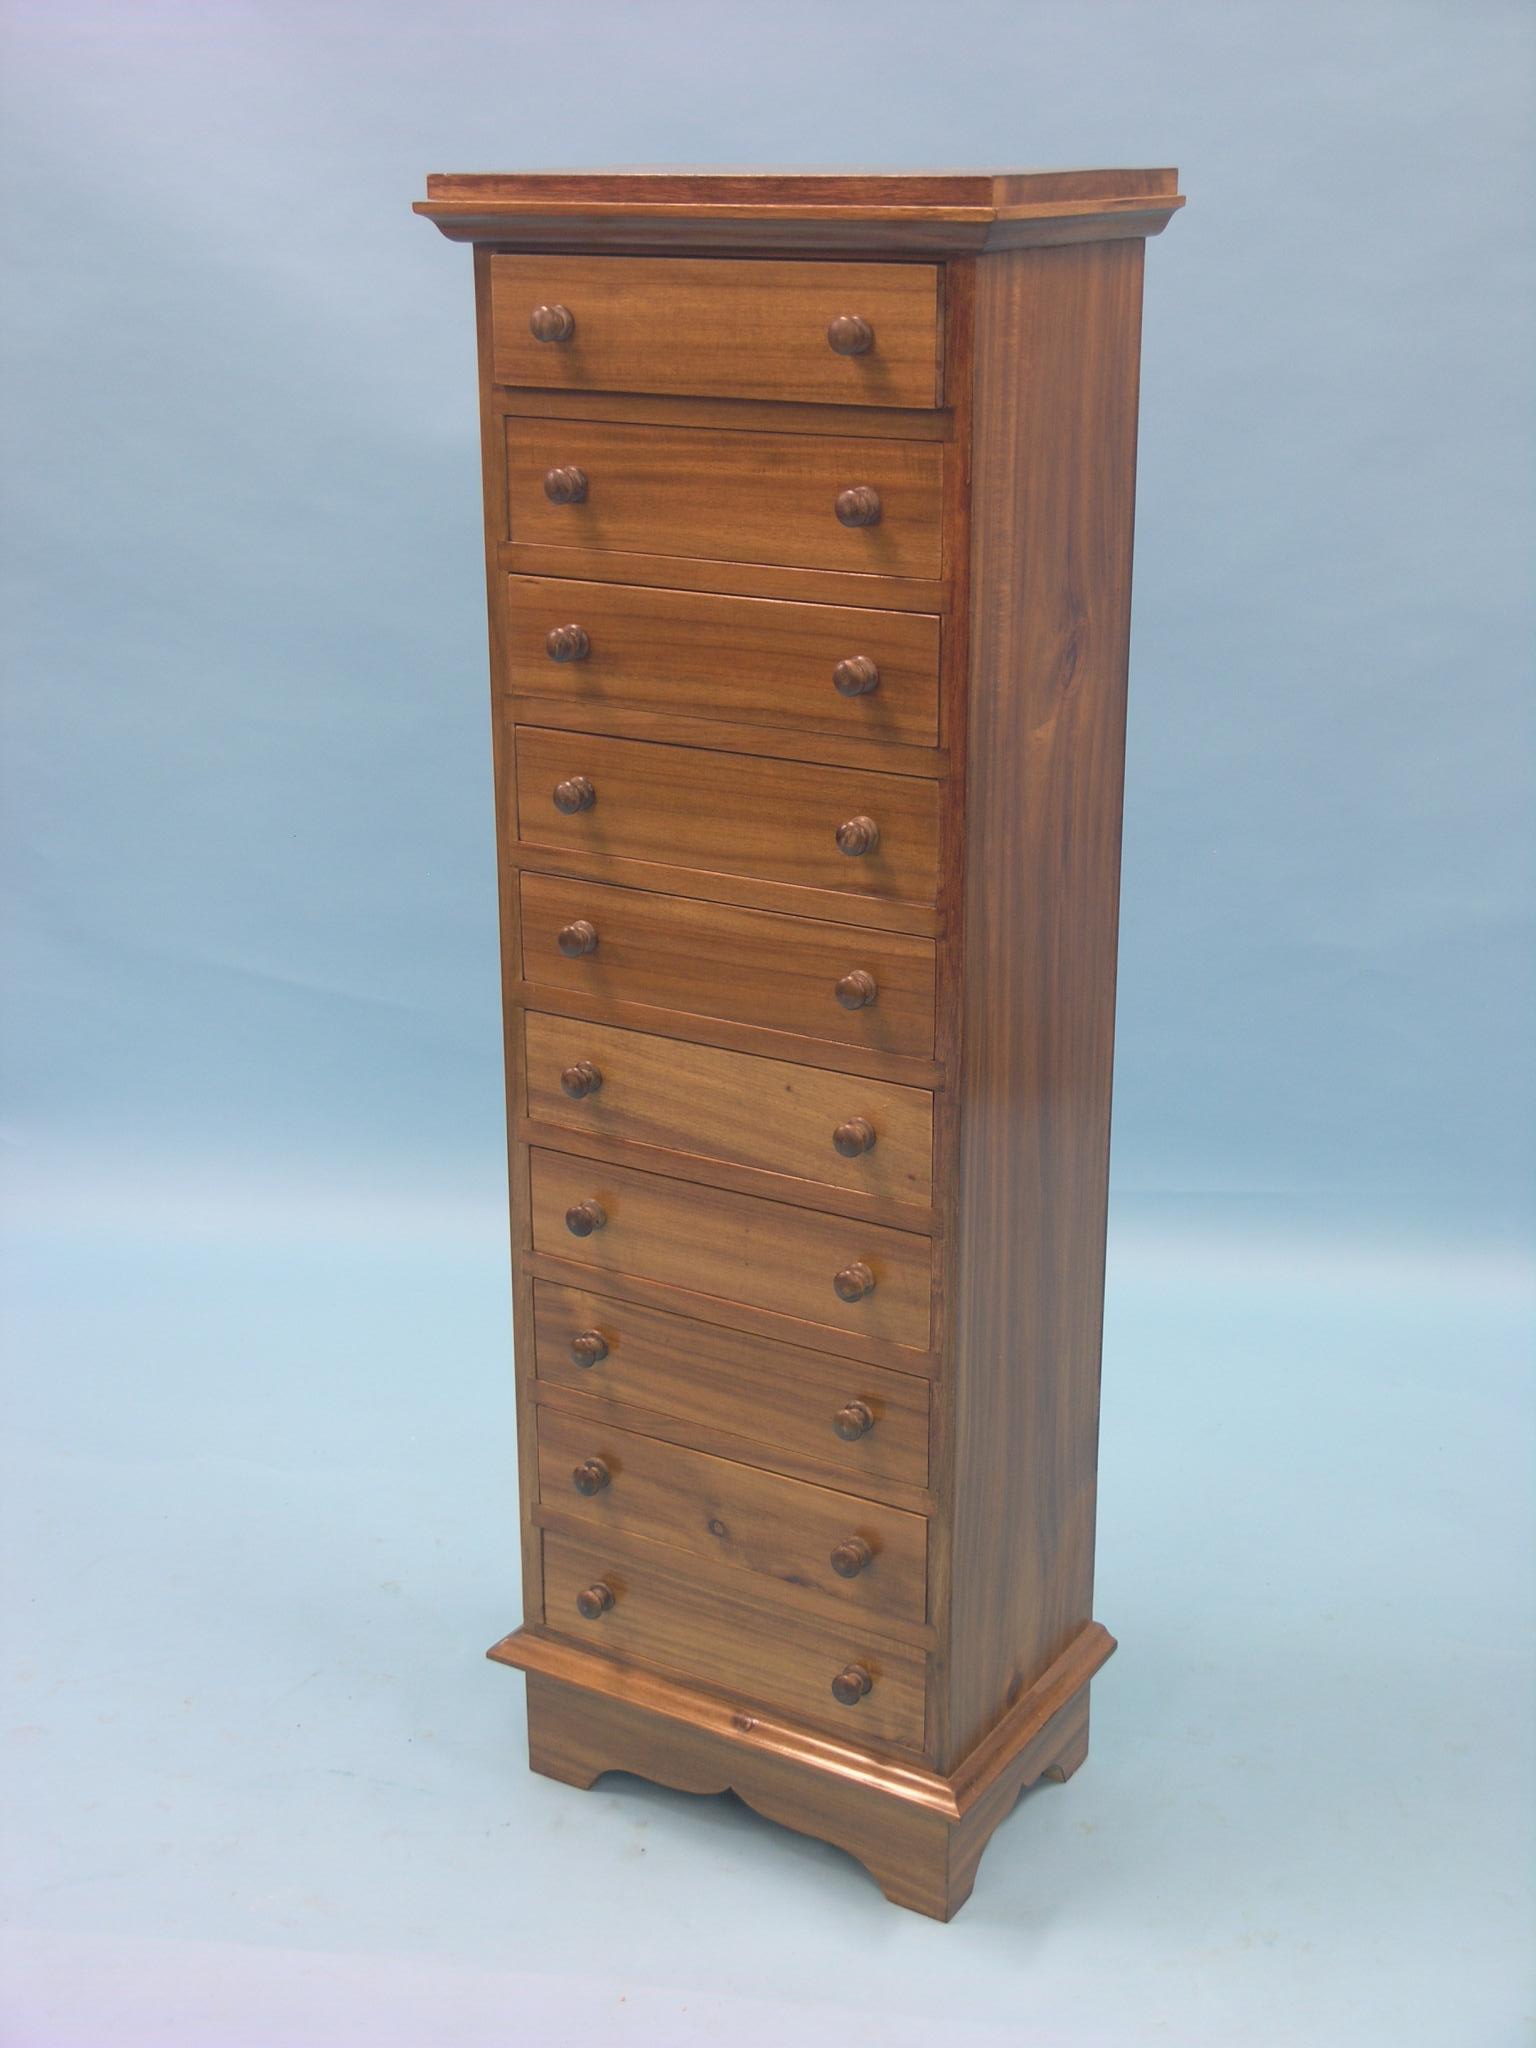 A narrow mahogany chest, ten drawers, each with turned wood knob handles, 16in.